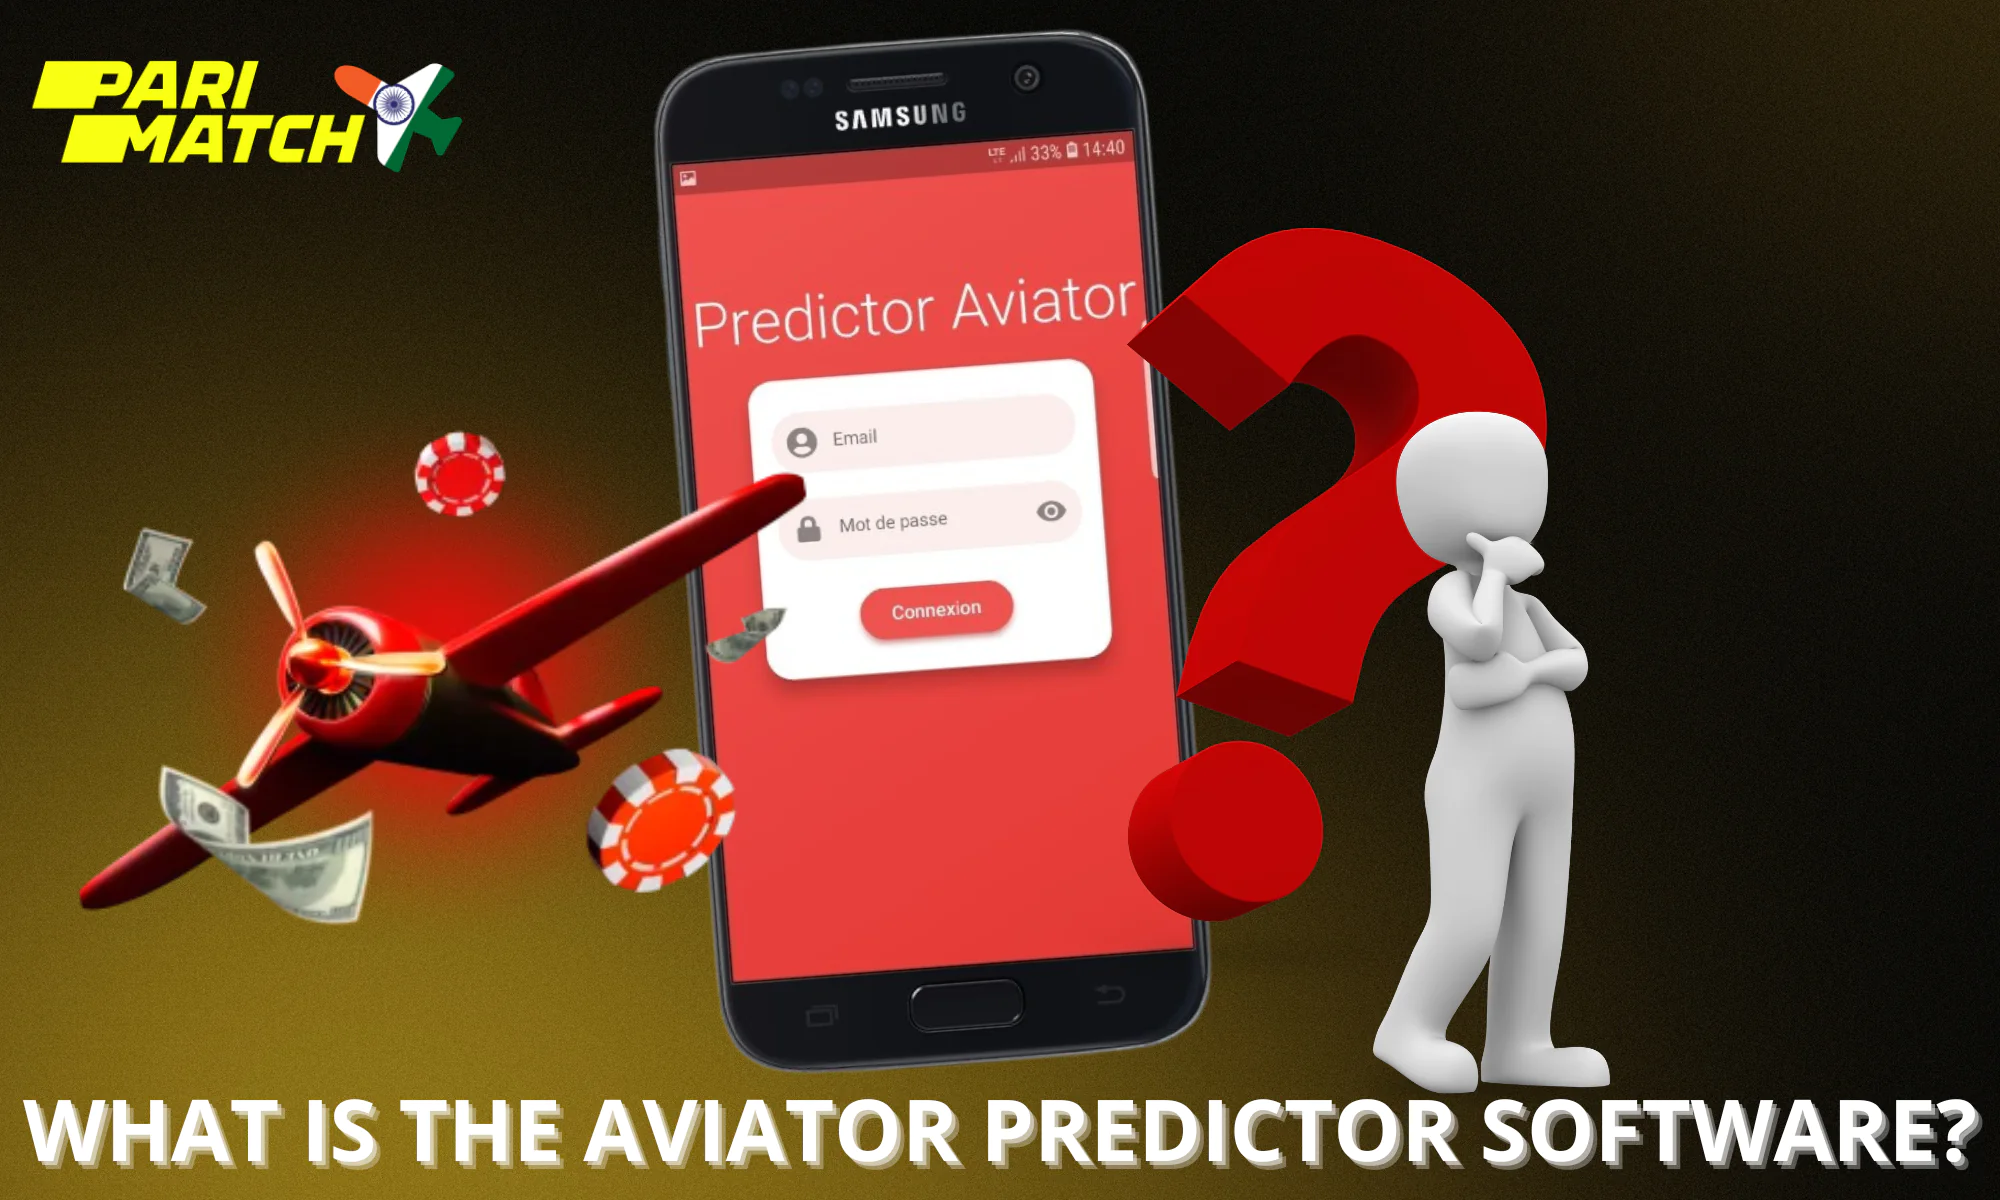 Parimatch Aviator Predictor is an artificial intelligence that determines the odds of an aircraft succeeding in the upcoming round